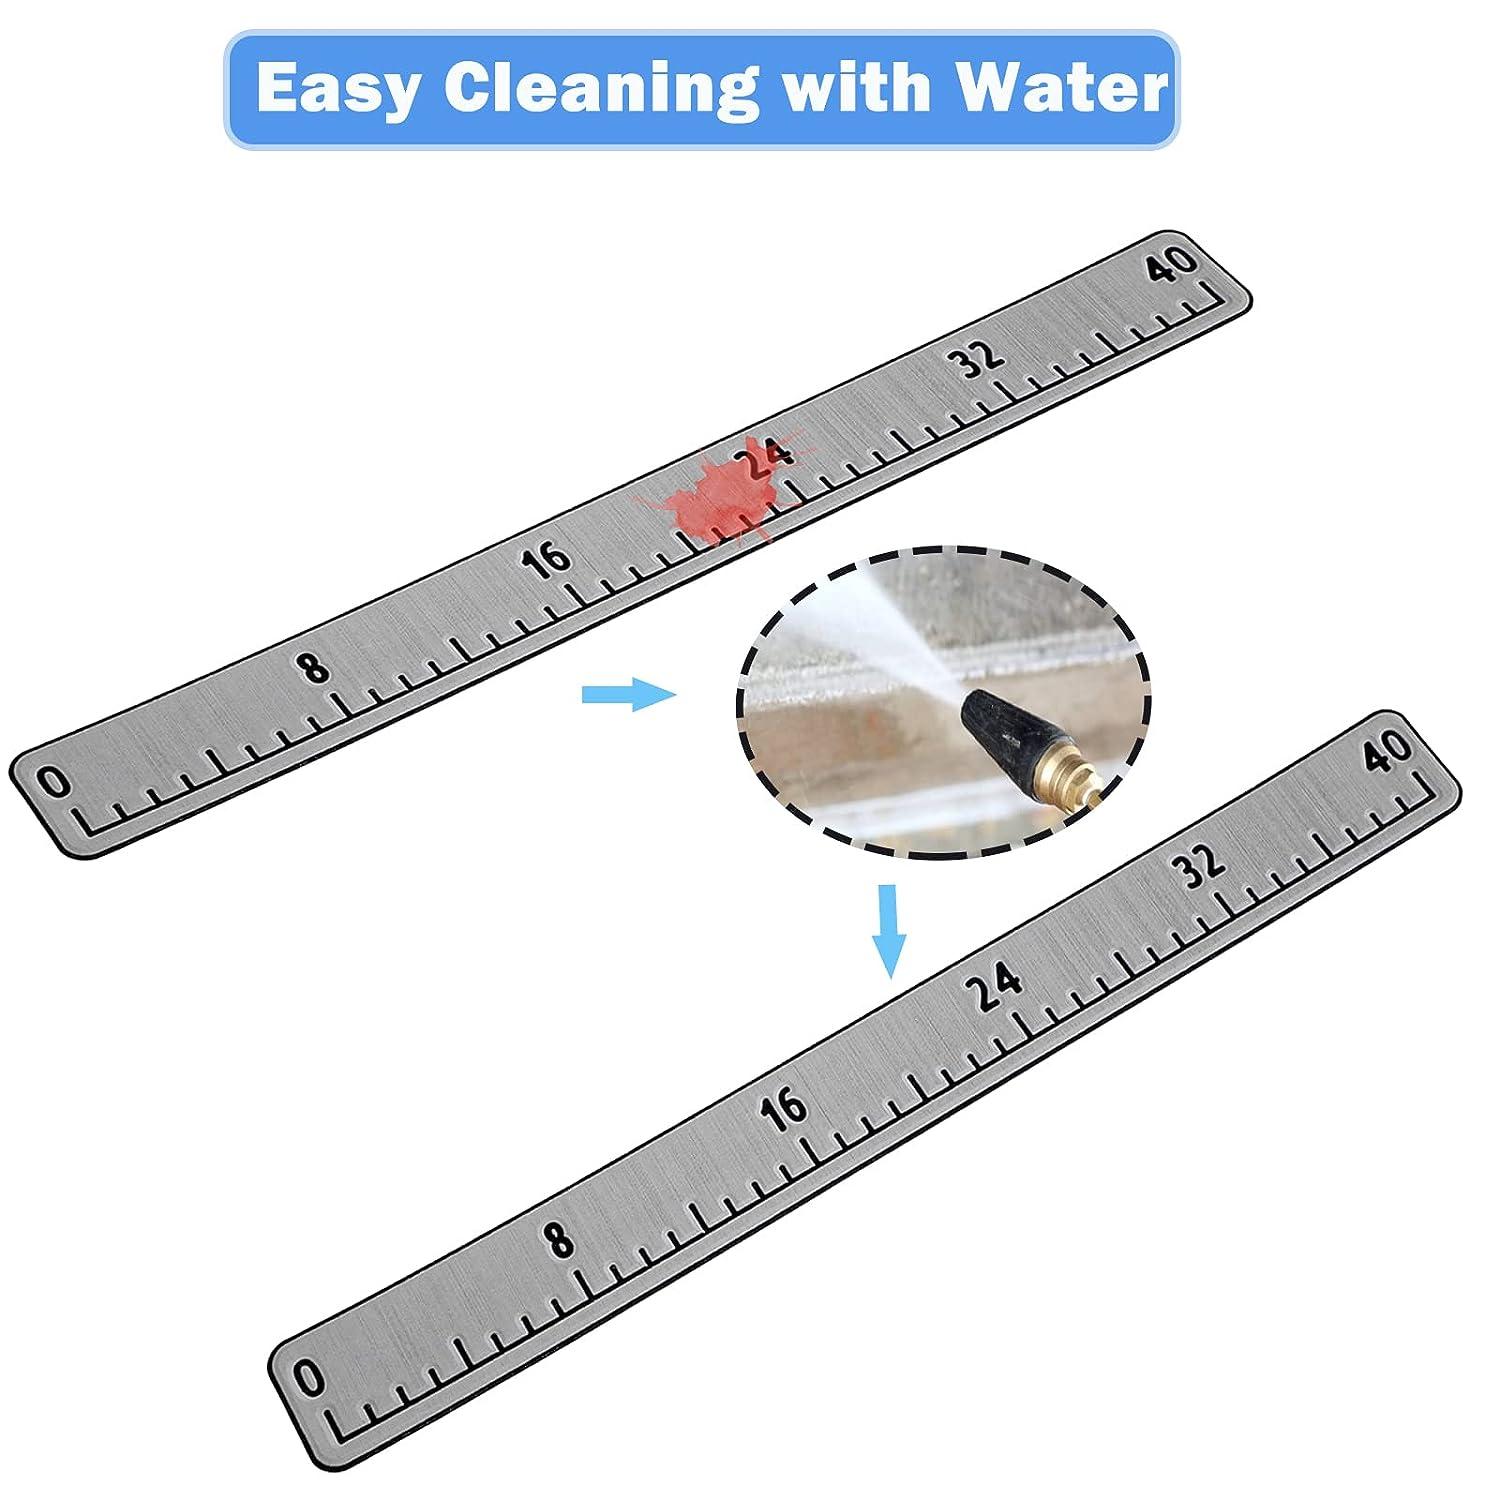 Boat Deck Fishing Ruler EVA with Adhesive Backing Precision Marks